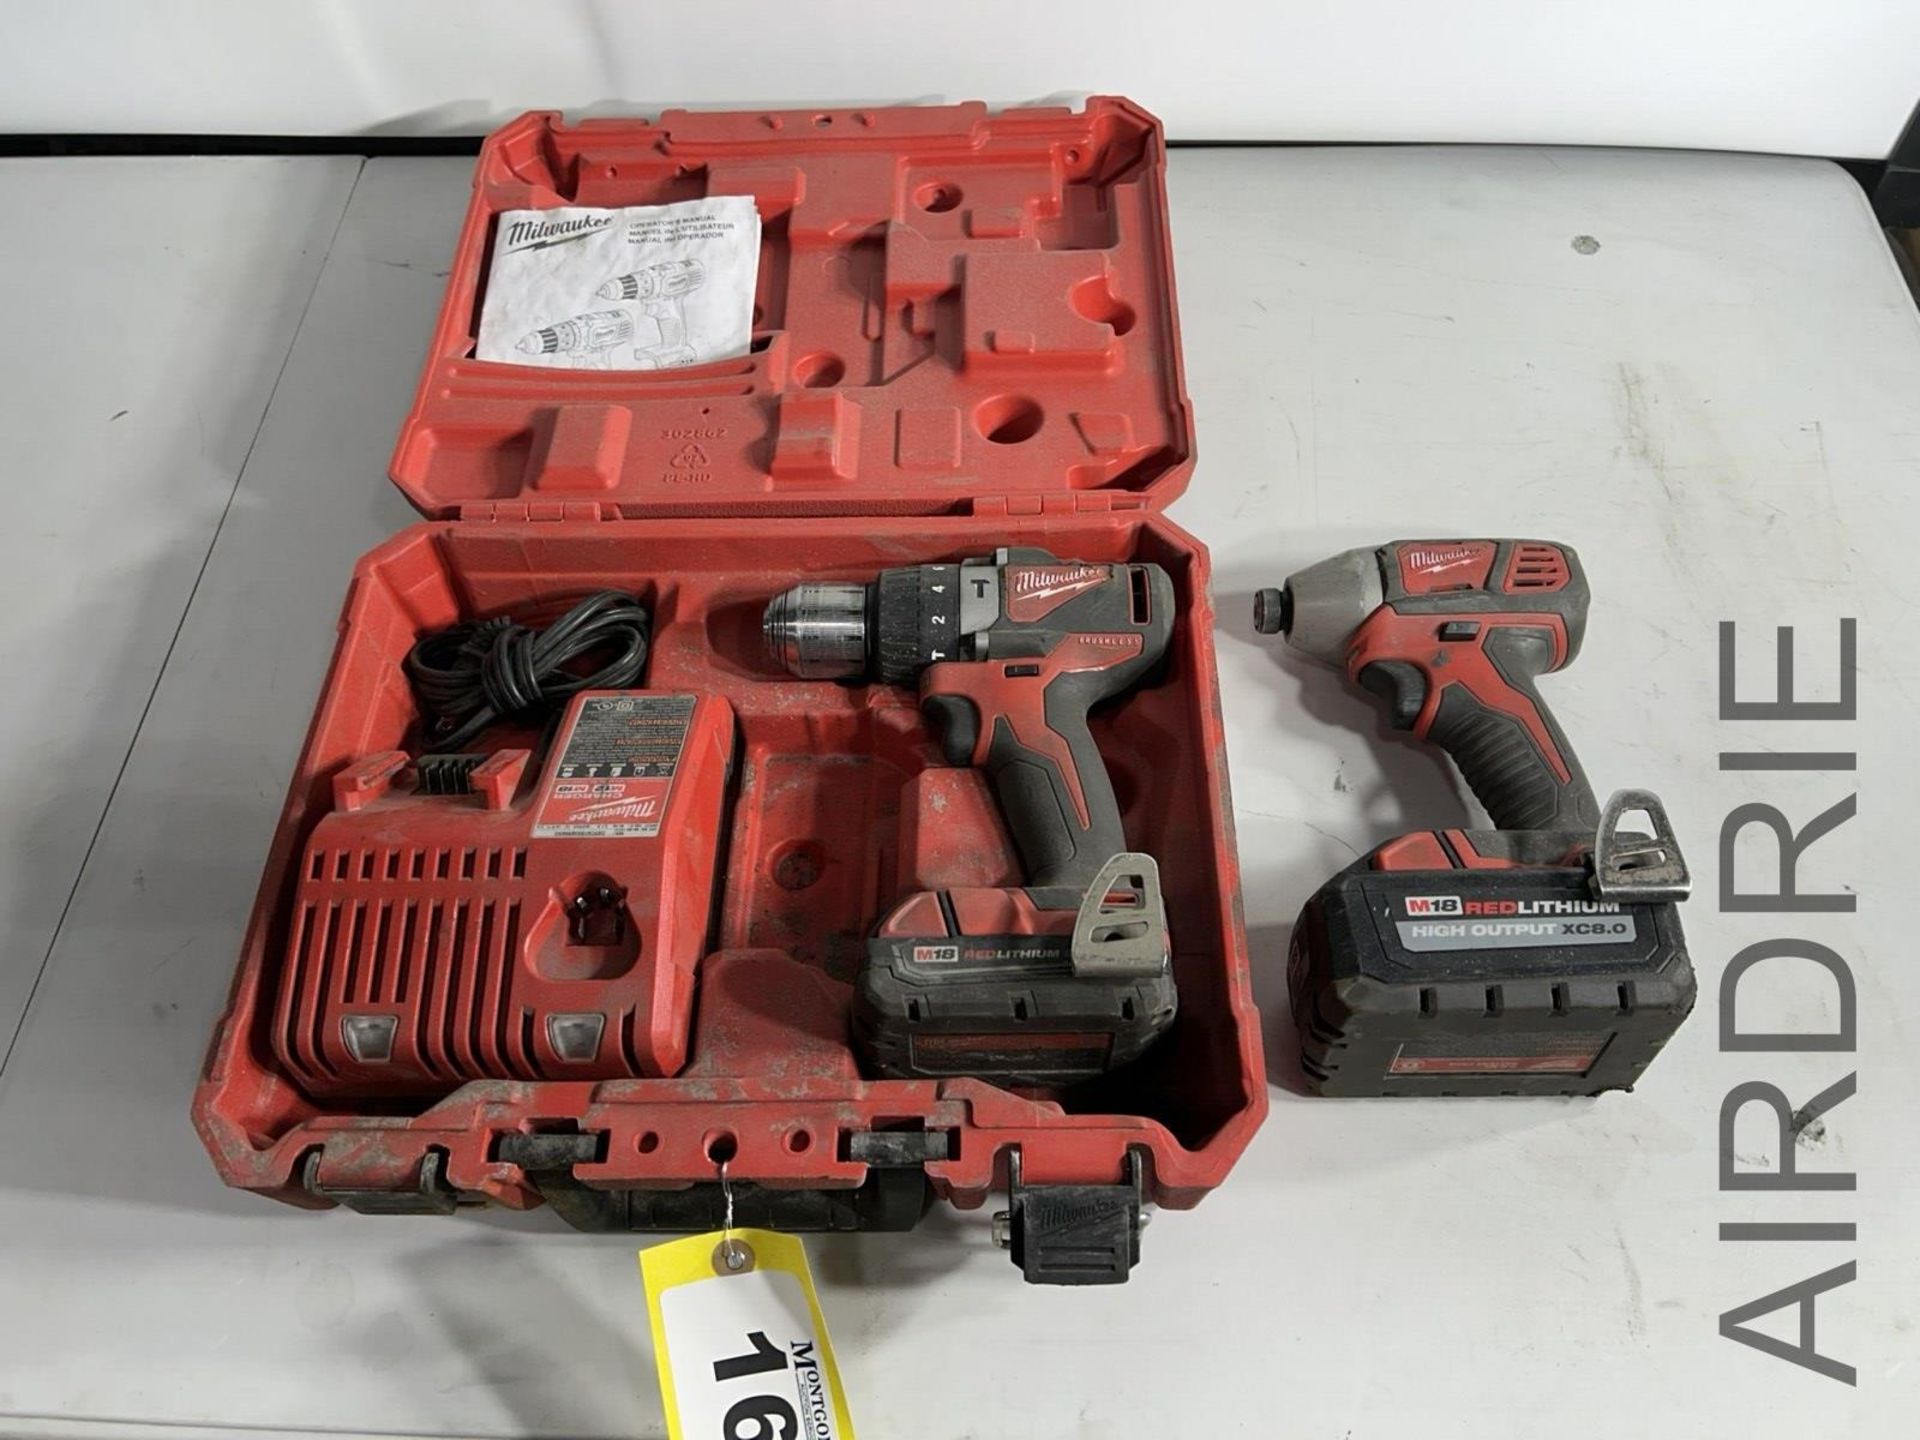 *OFFSITE* MILWAUKEE CORDLESS DRILL AND IMPACT DRIVER KIT W/ BATTERY AND CHARGER